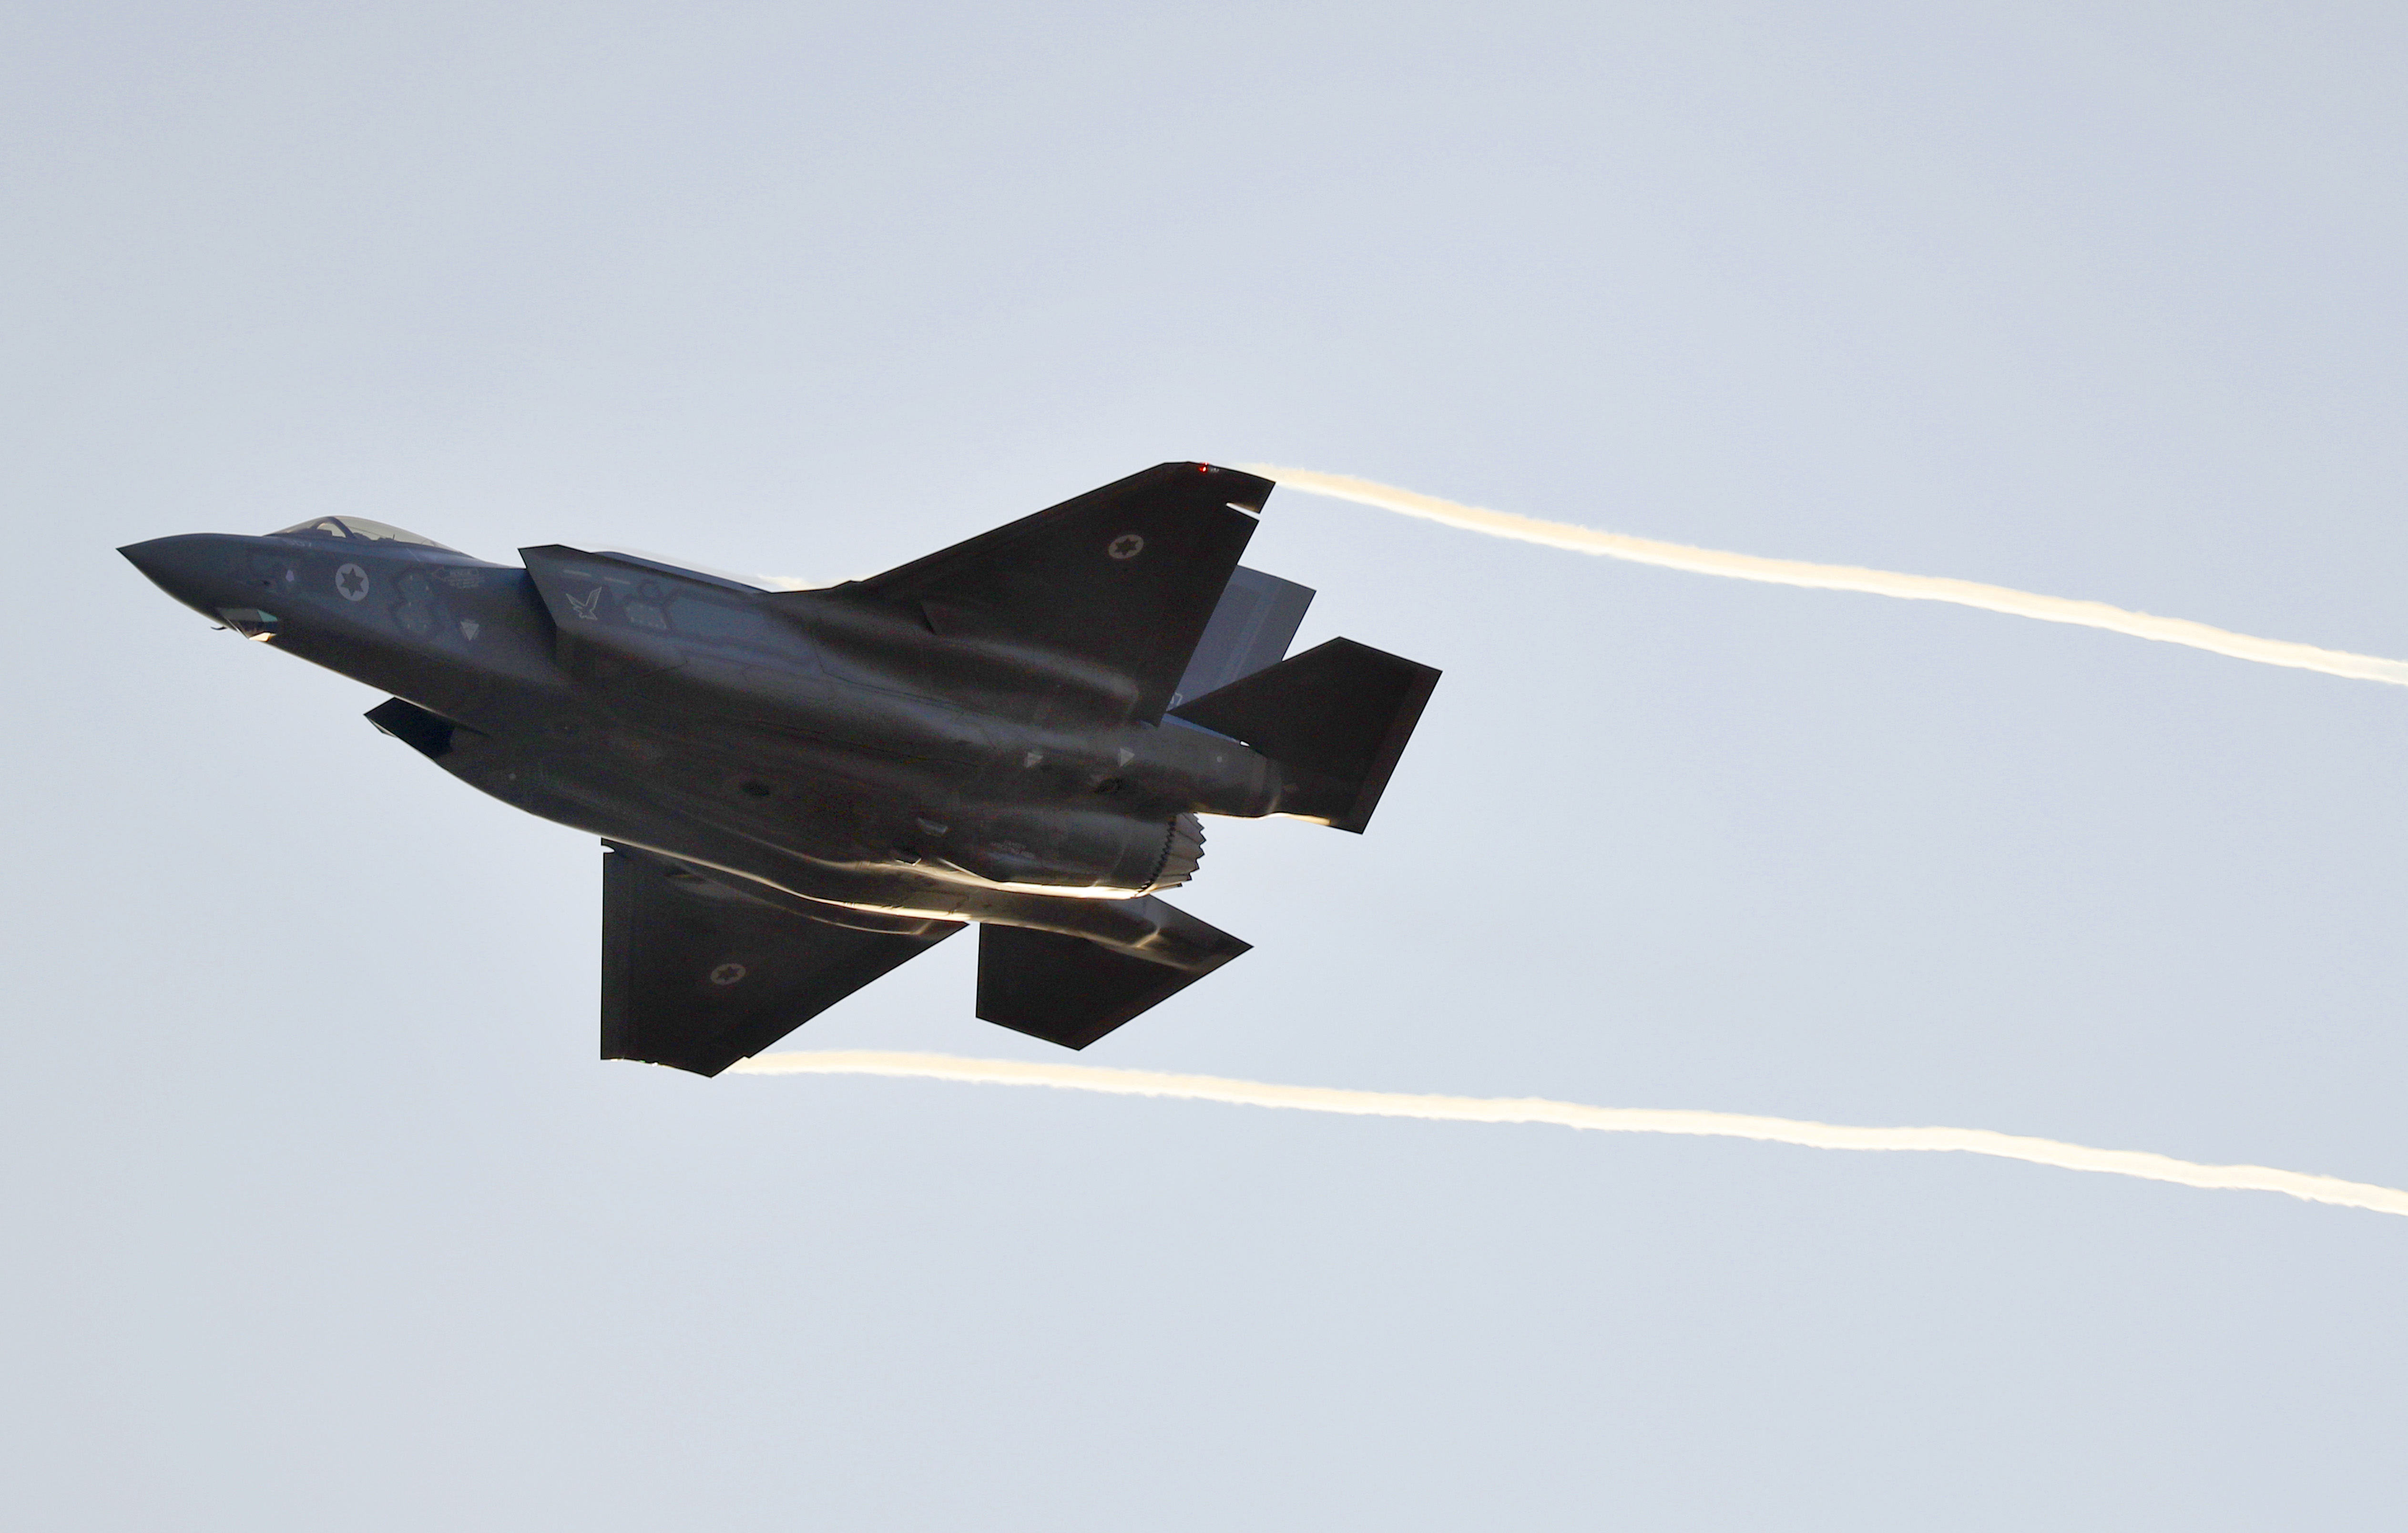 Pentagon preparing to move F-35 work out of Turkey